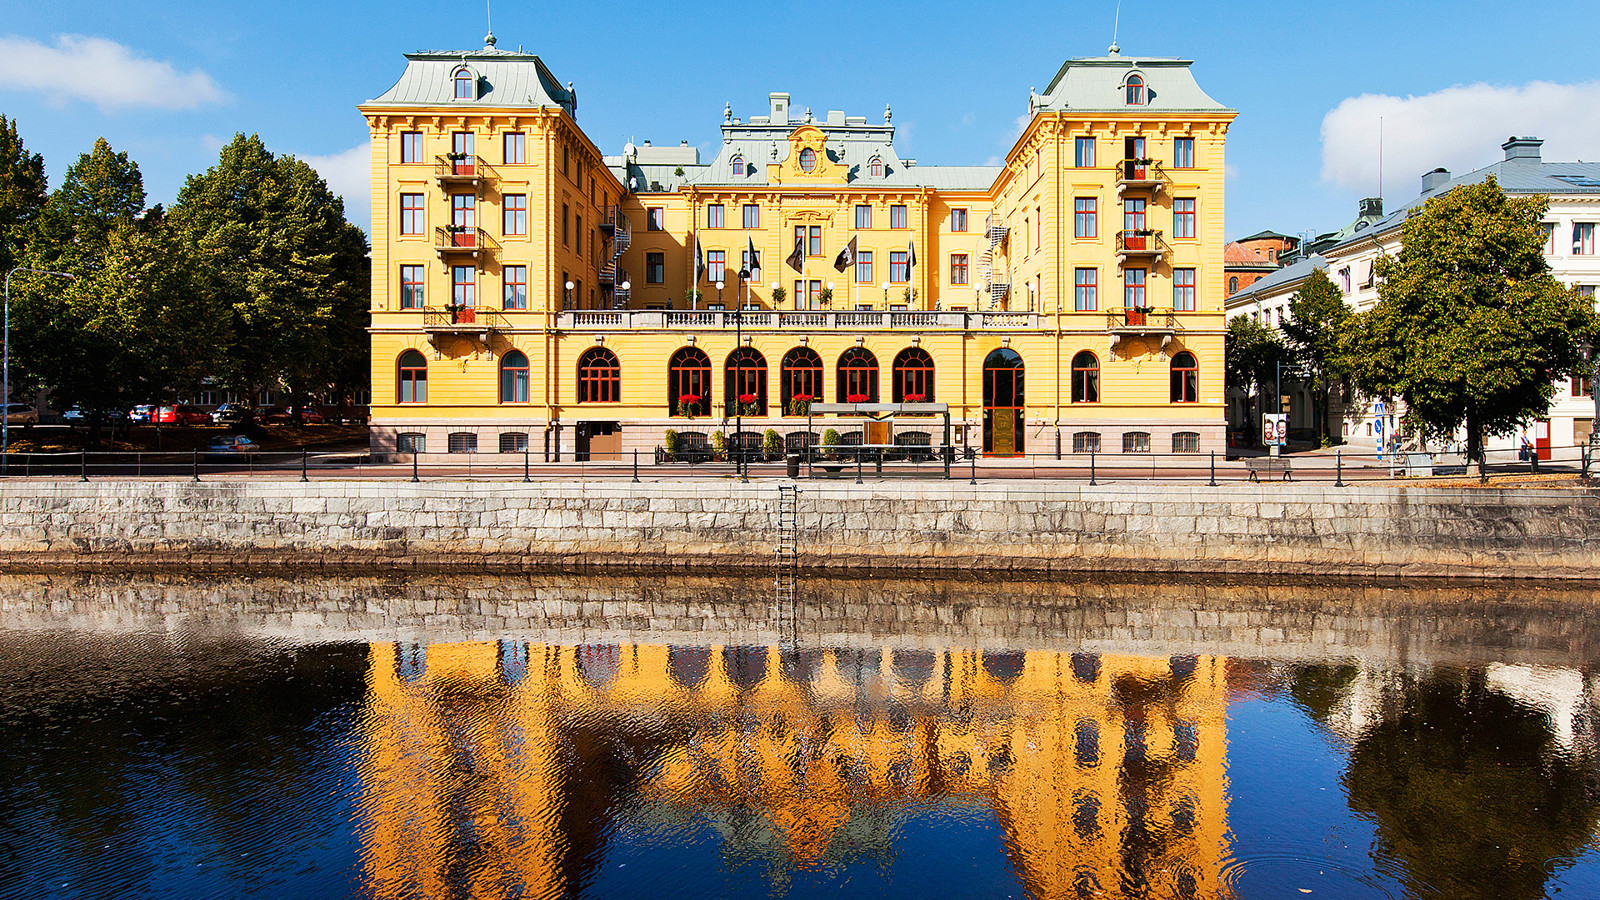 The yellow facade of the Elite Grand Hotel in Gävle